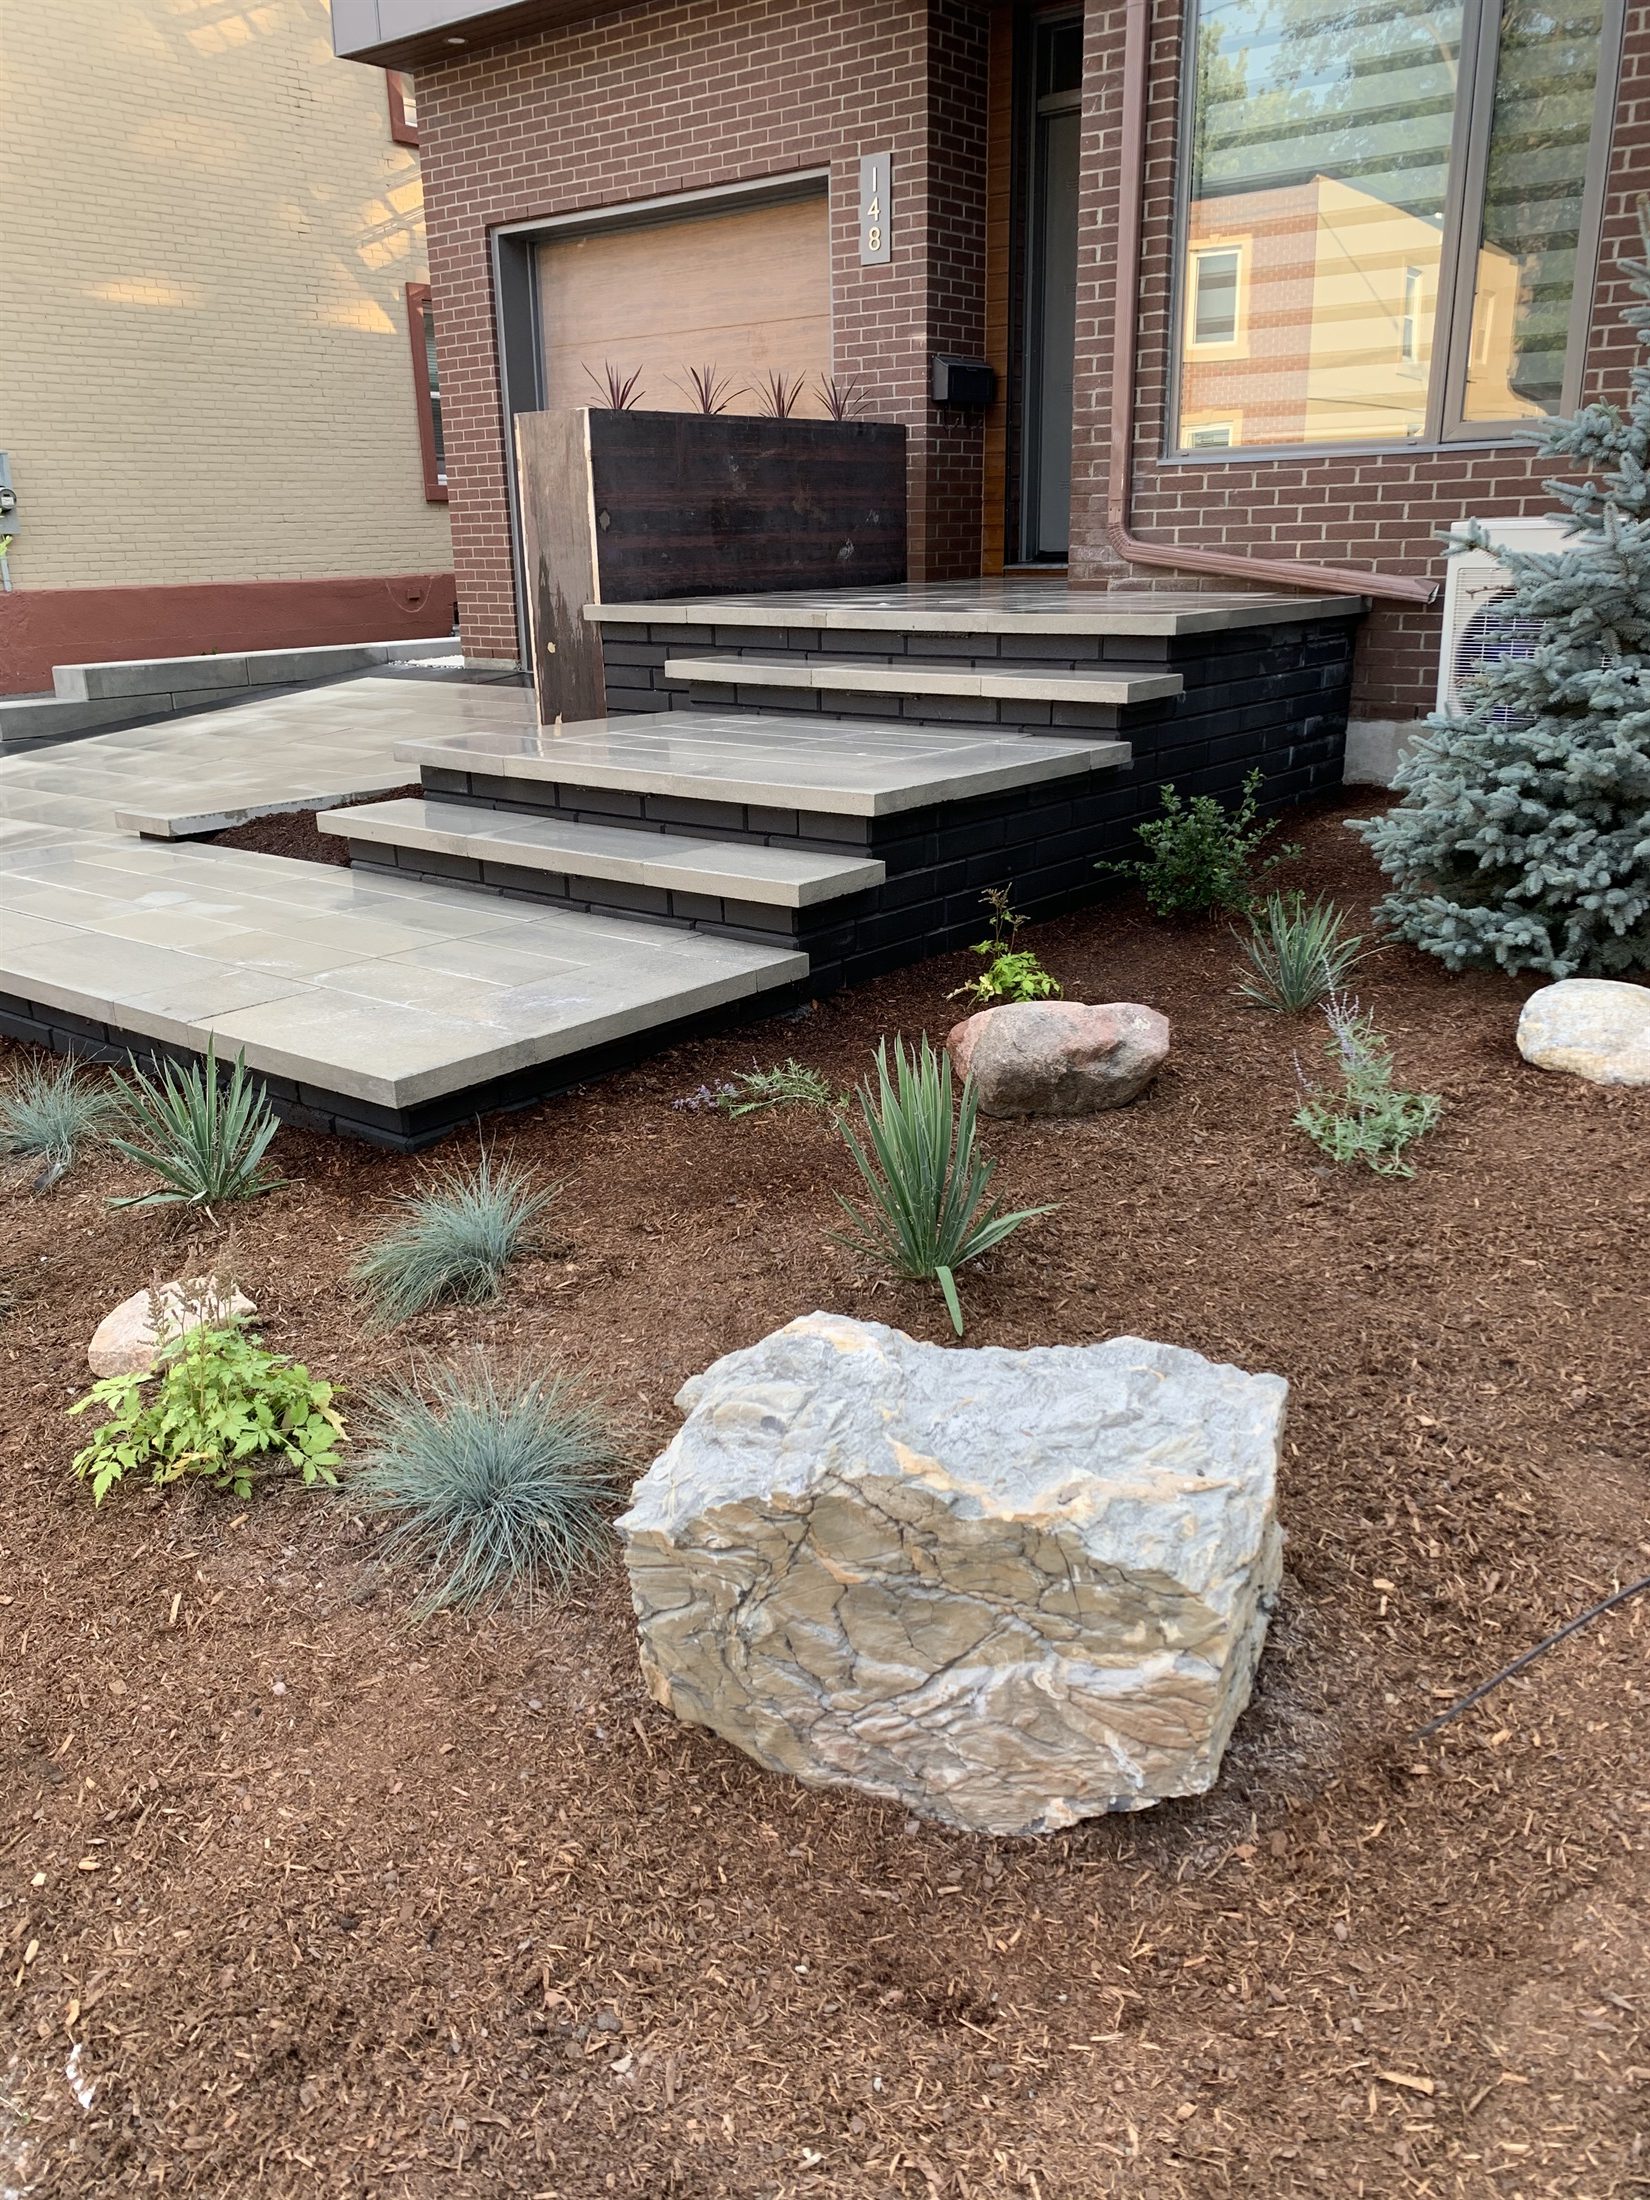 Landscaping Design and Interlock Stairs from Stittsville.